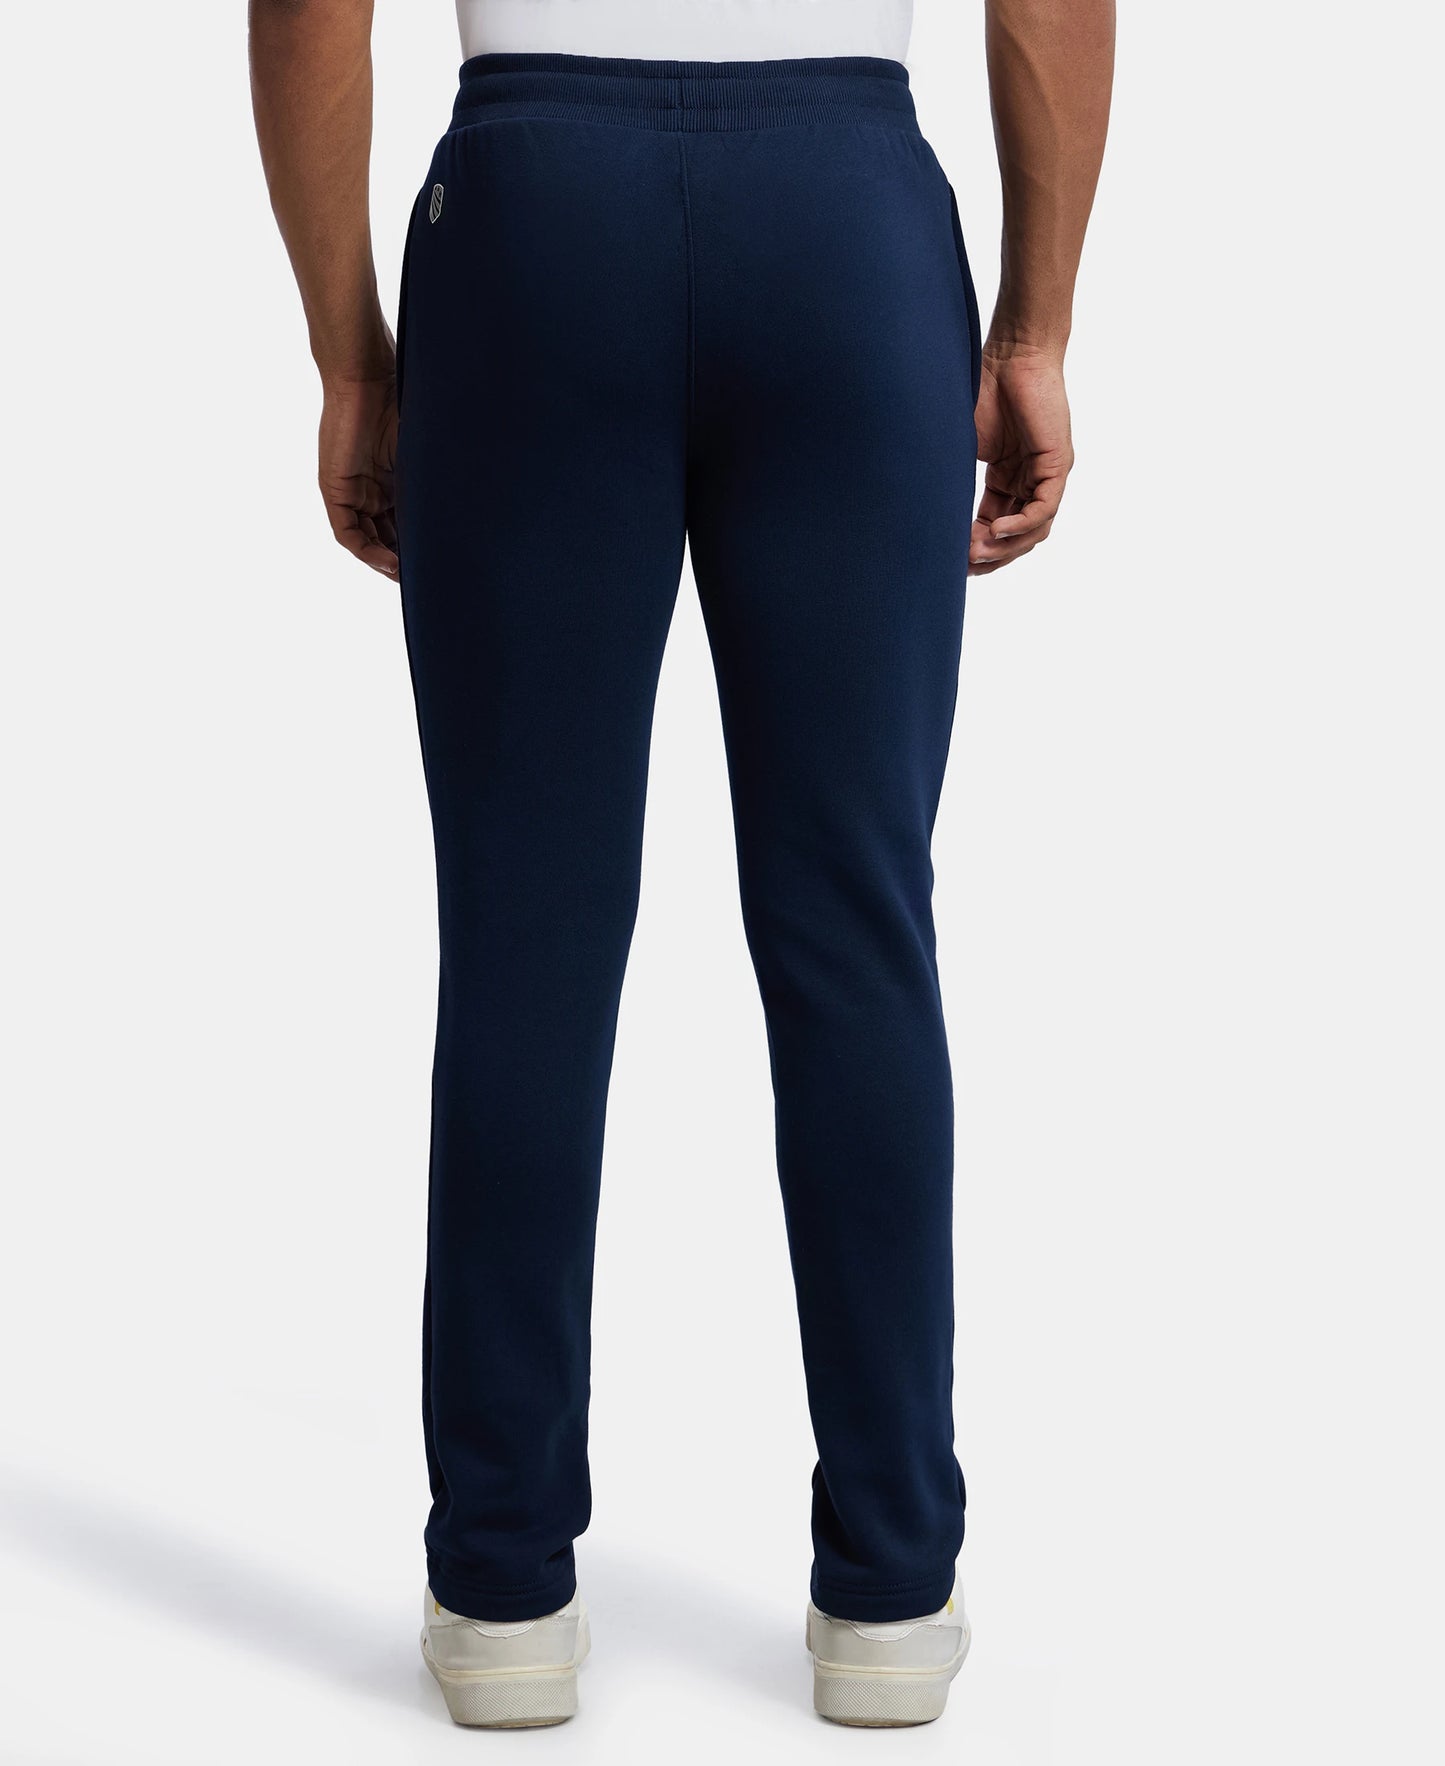 Super Combed Cotton Rich Fleece Trackpants with StayWarm Technology - Navy-3